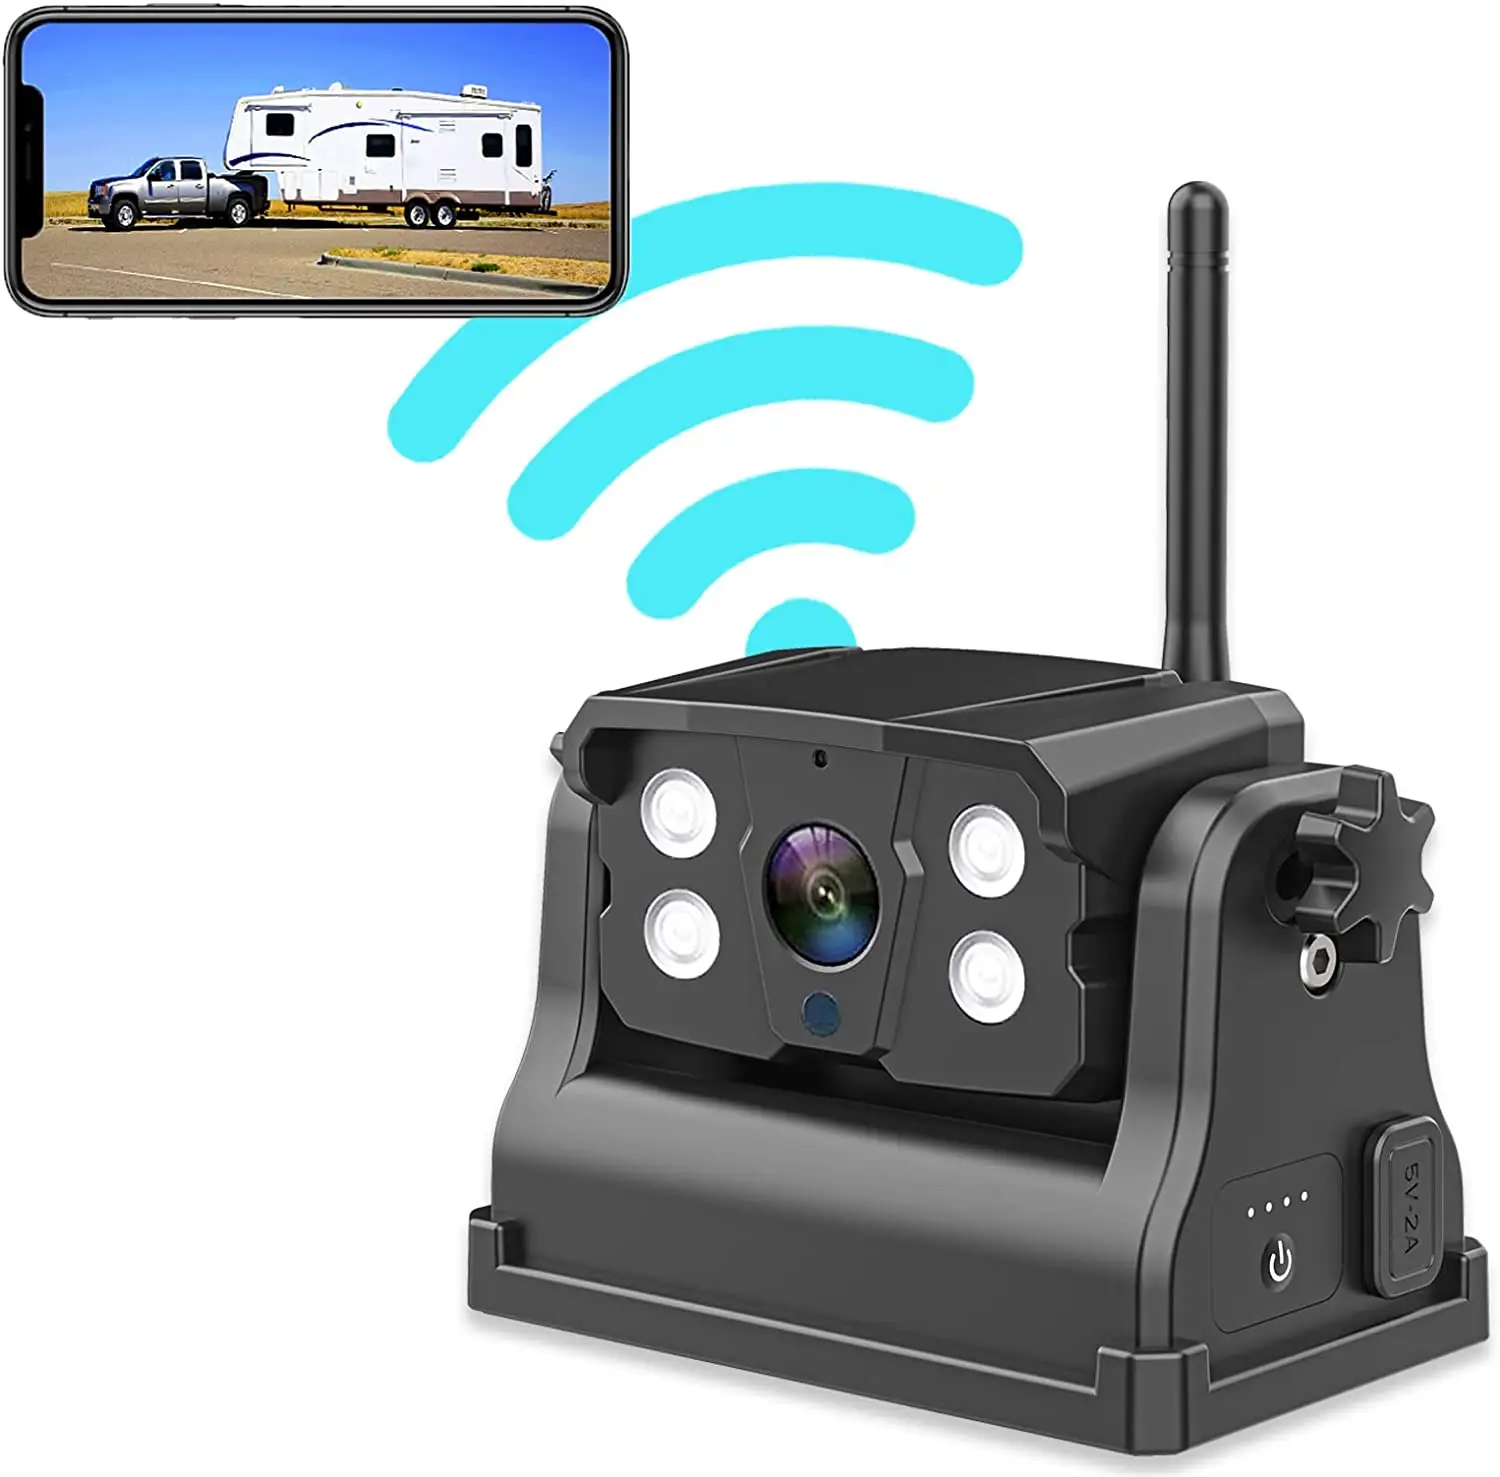 Wireless camera for Android mobile